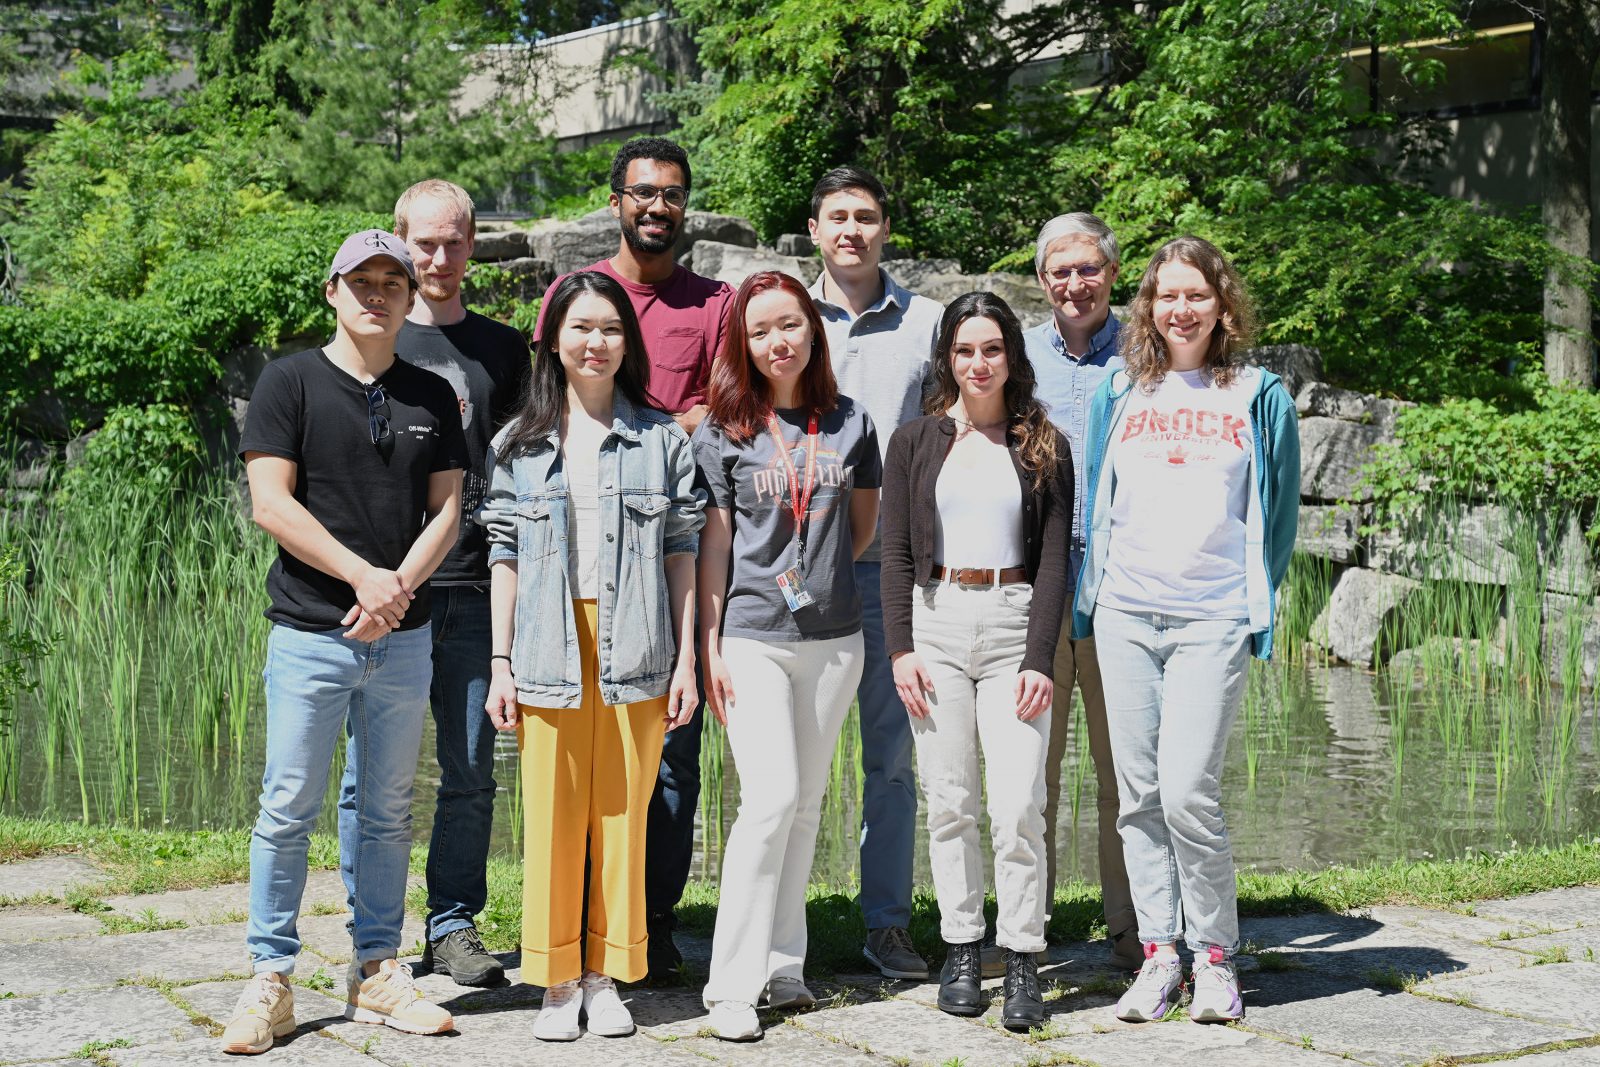 Eight current and former students of Professor Georgii Nikonov stand in two rows in front of Pond Inlet at Brock University. They are surrounded by greenery and backed by a pond and waterfall flowing over grey stone rock wall.